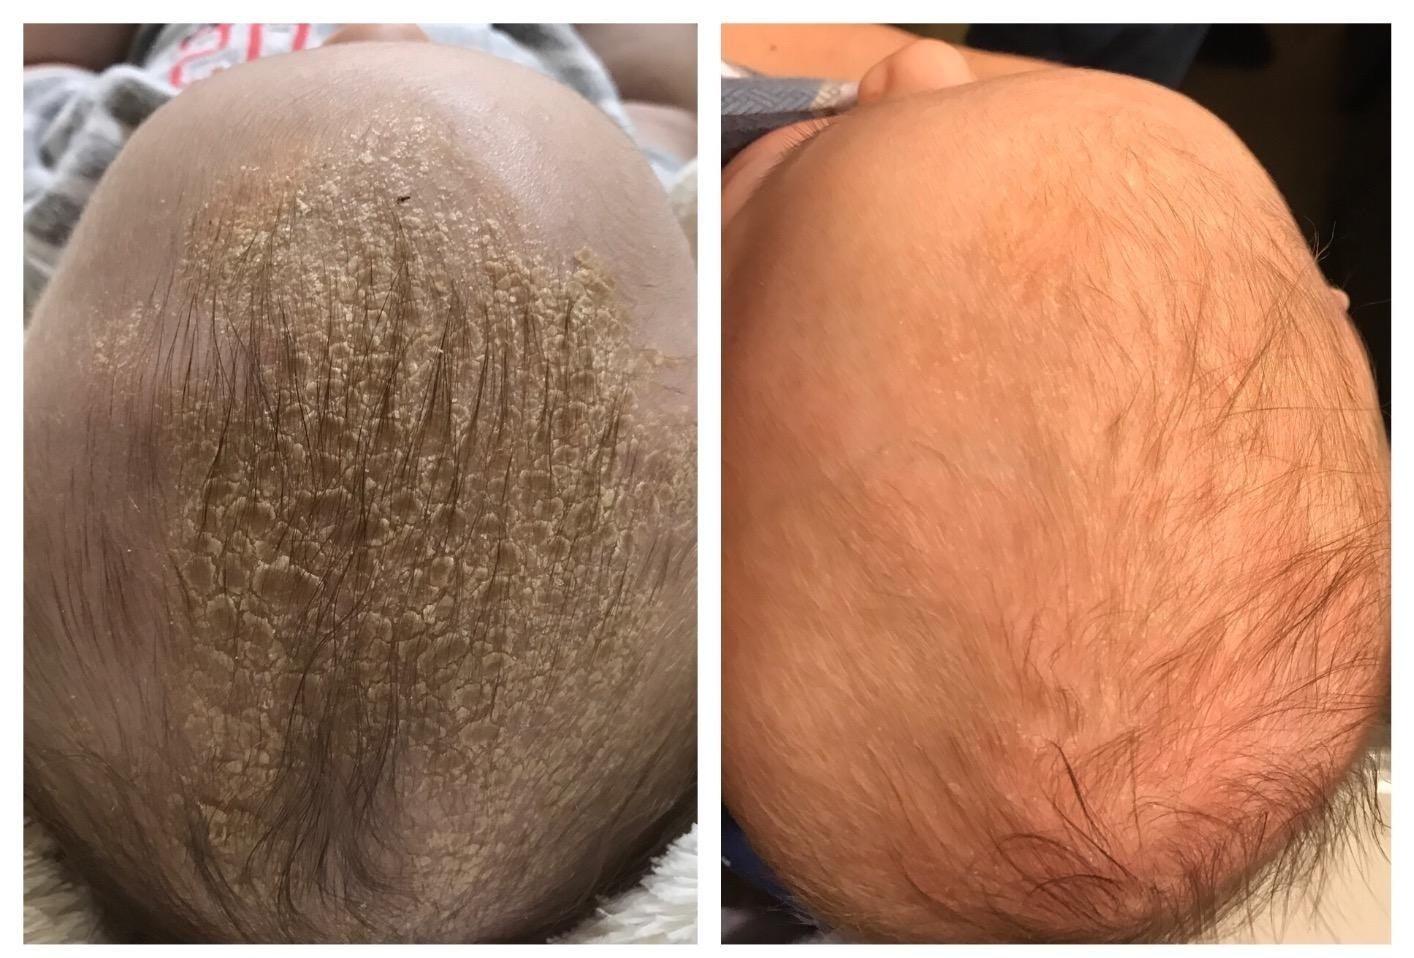 A baby's head with dry scales on the left and the same baby's head looking smoother and flake-free on the right